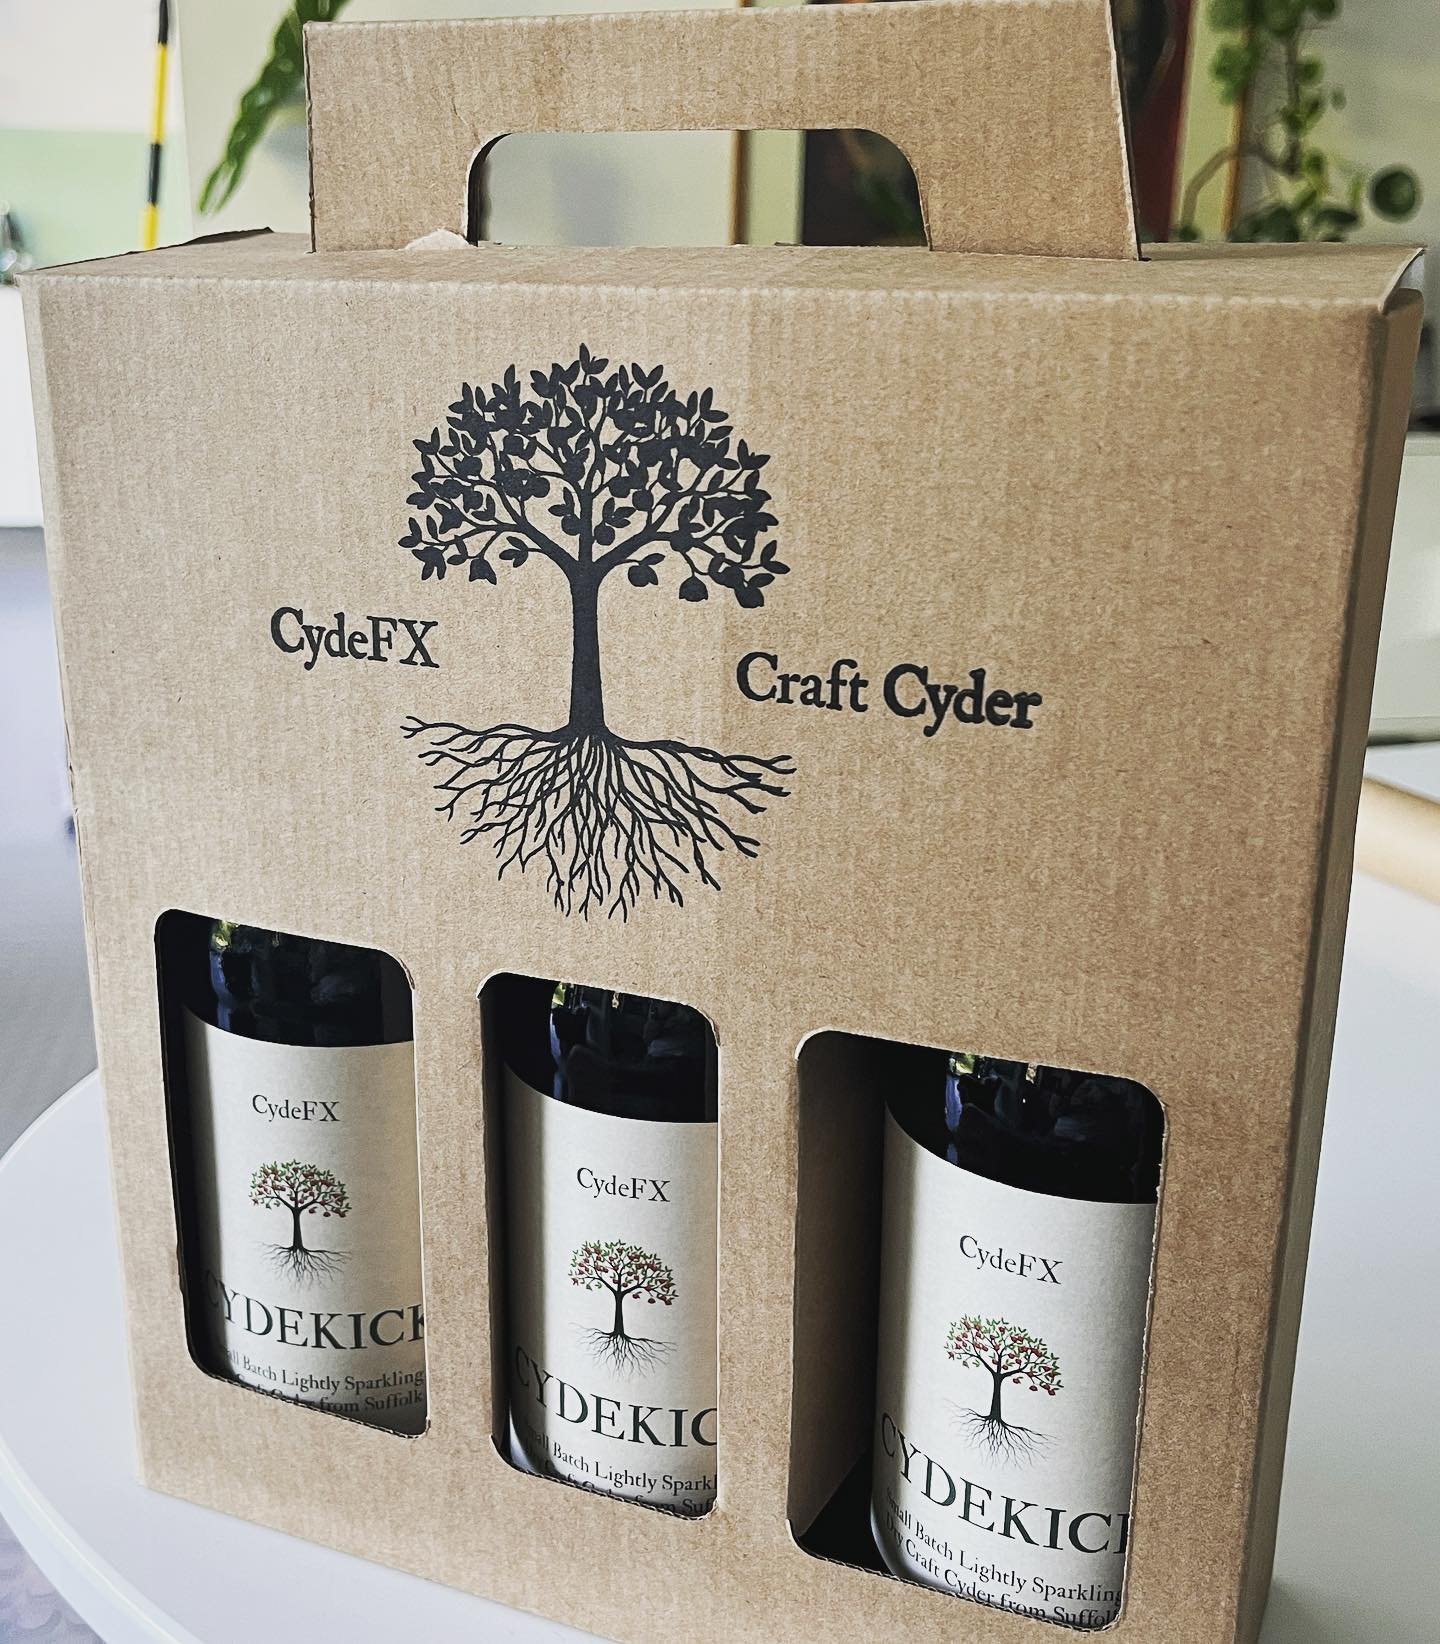 Gift pack boxes assembled and stamped ready for the St. Peter&rsquo;s Street Market, Ipswich, on Sunday 25th June. Looking forward to meeting you there!
.
.
.
.
#cider #realcider #craftcider #cydefx